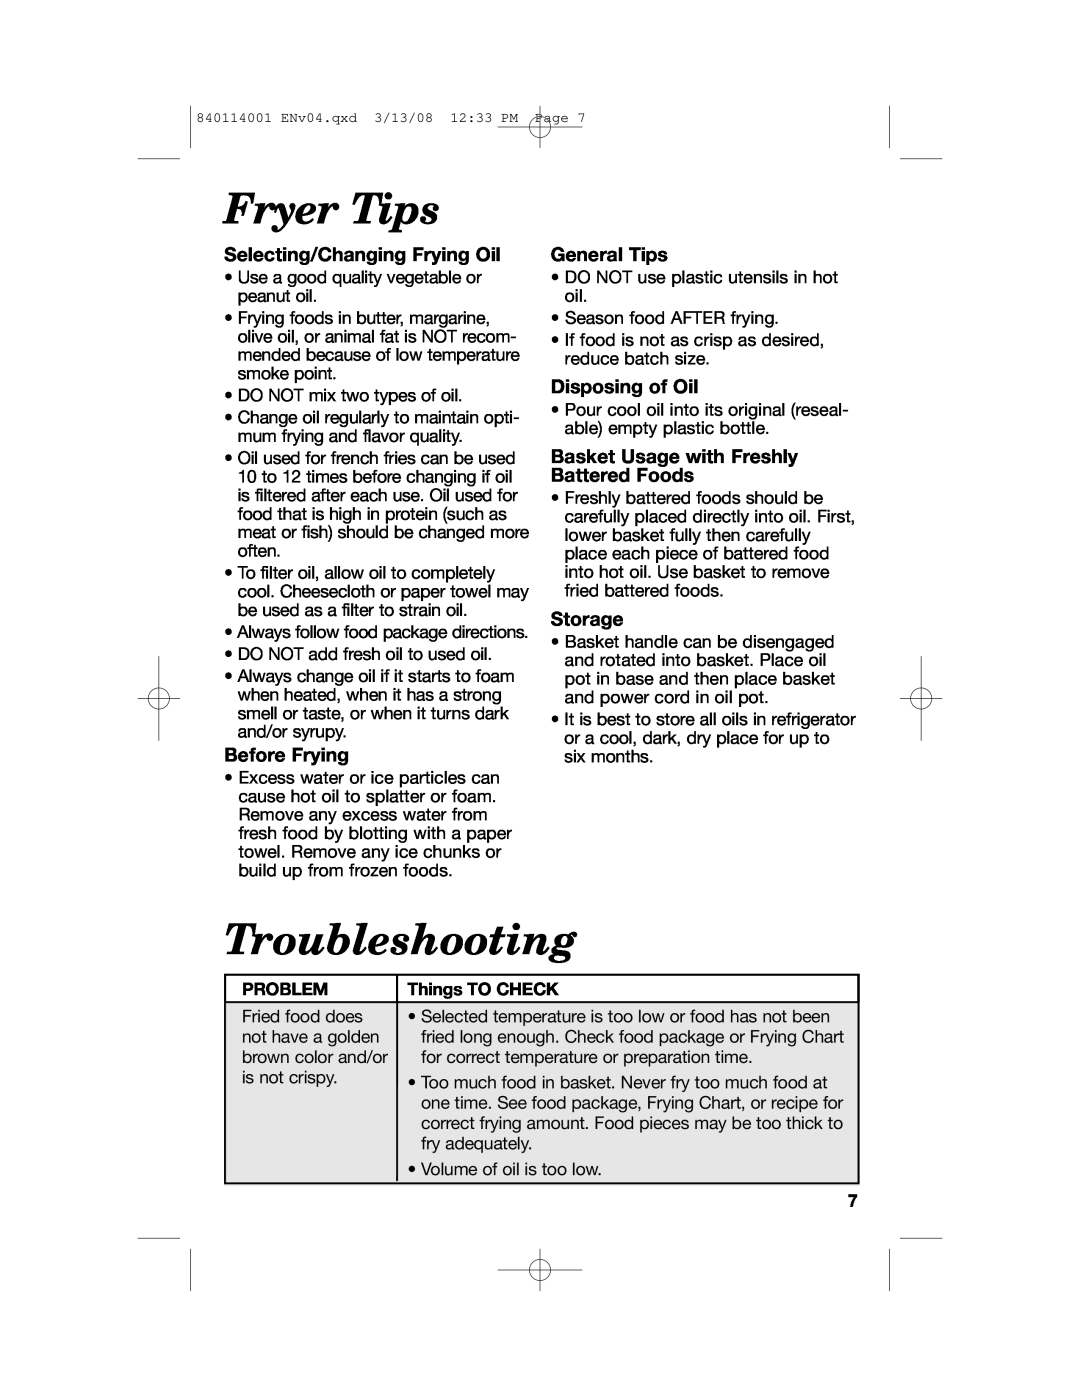 Hamilton Beach 840114001 Fryer Tips, Troubleshooting, Selecting/Changing Frying Oil, Before Frying, General Tips, Storage 